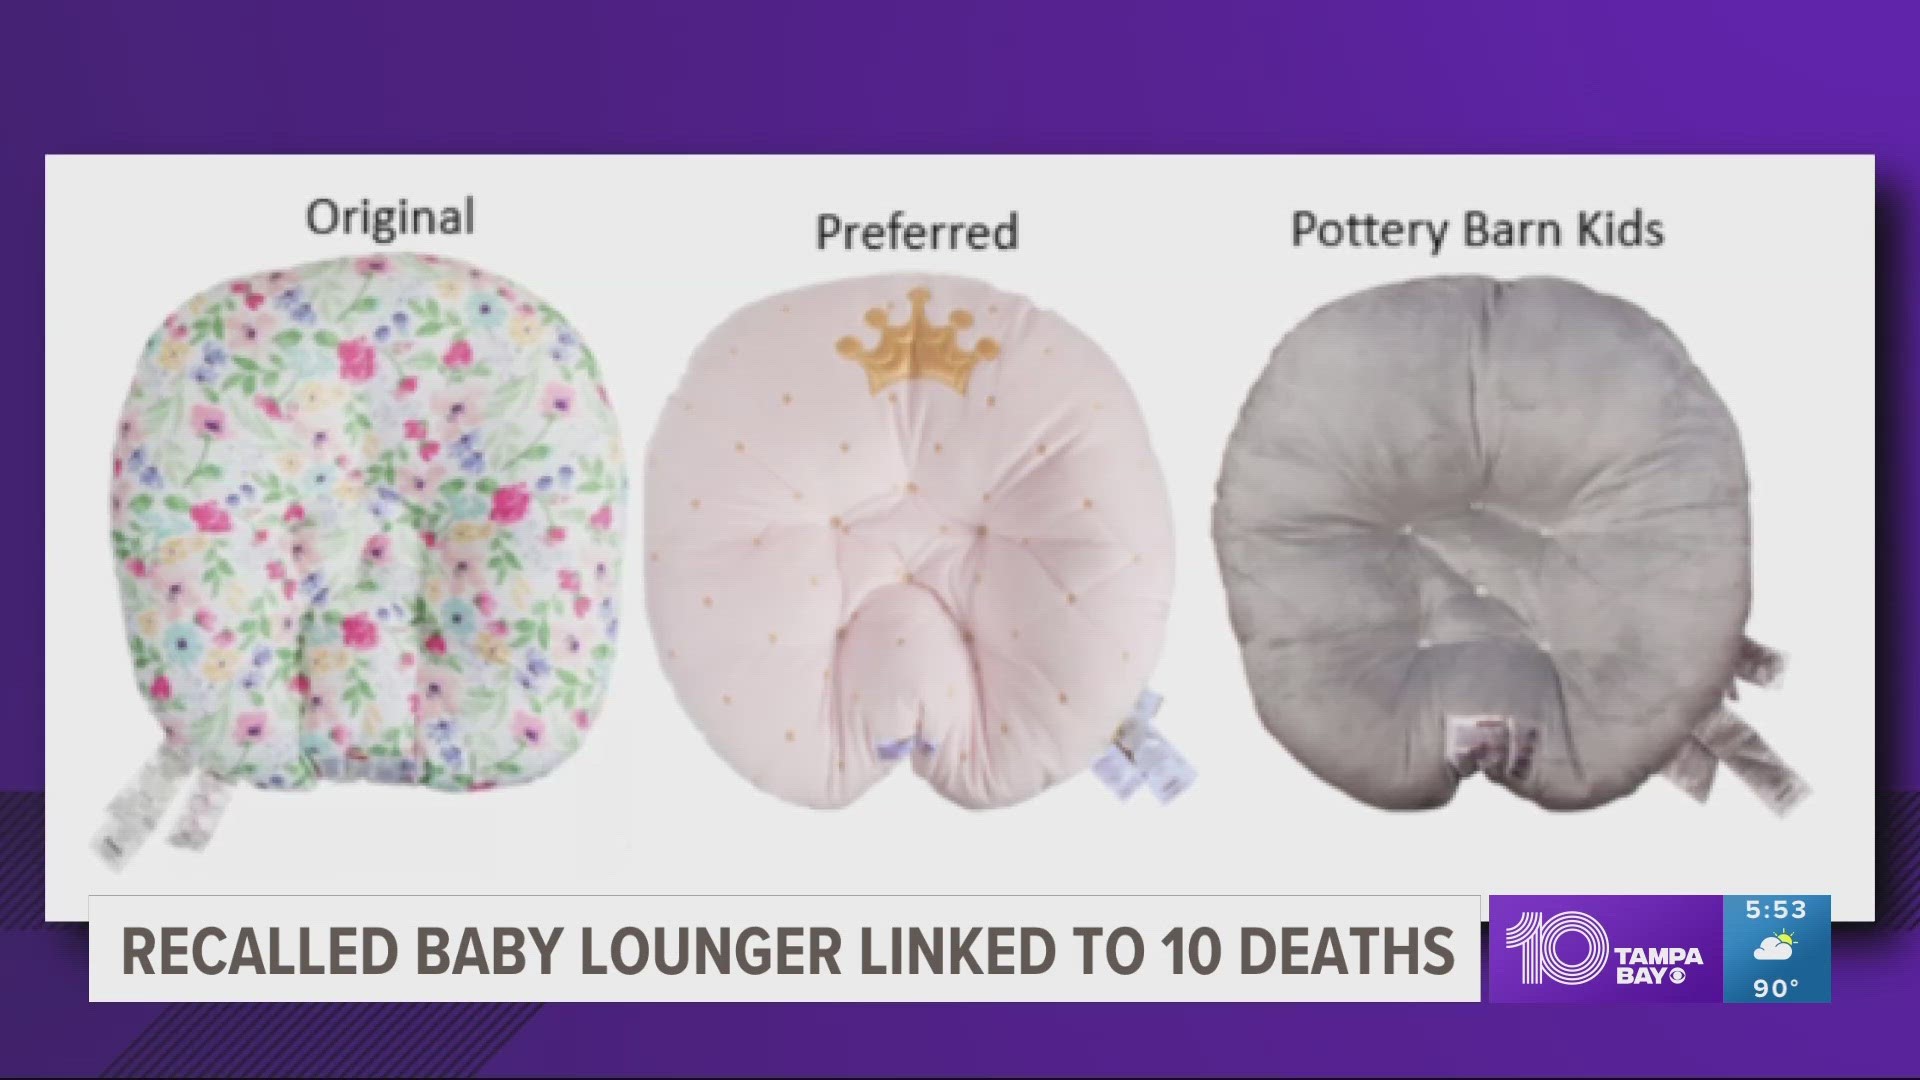 More than 3 million Boppy baby loungers were recalled in 2021 due to a risk of suffocation. Since then, two more infant deaths have been reported.